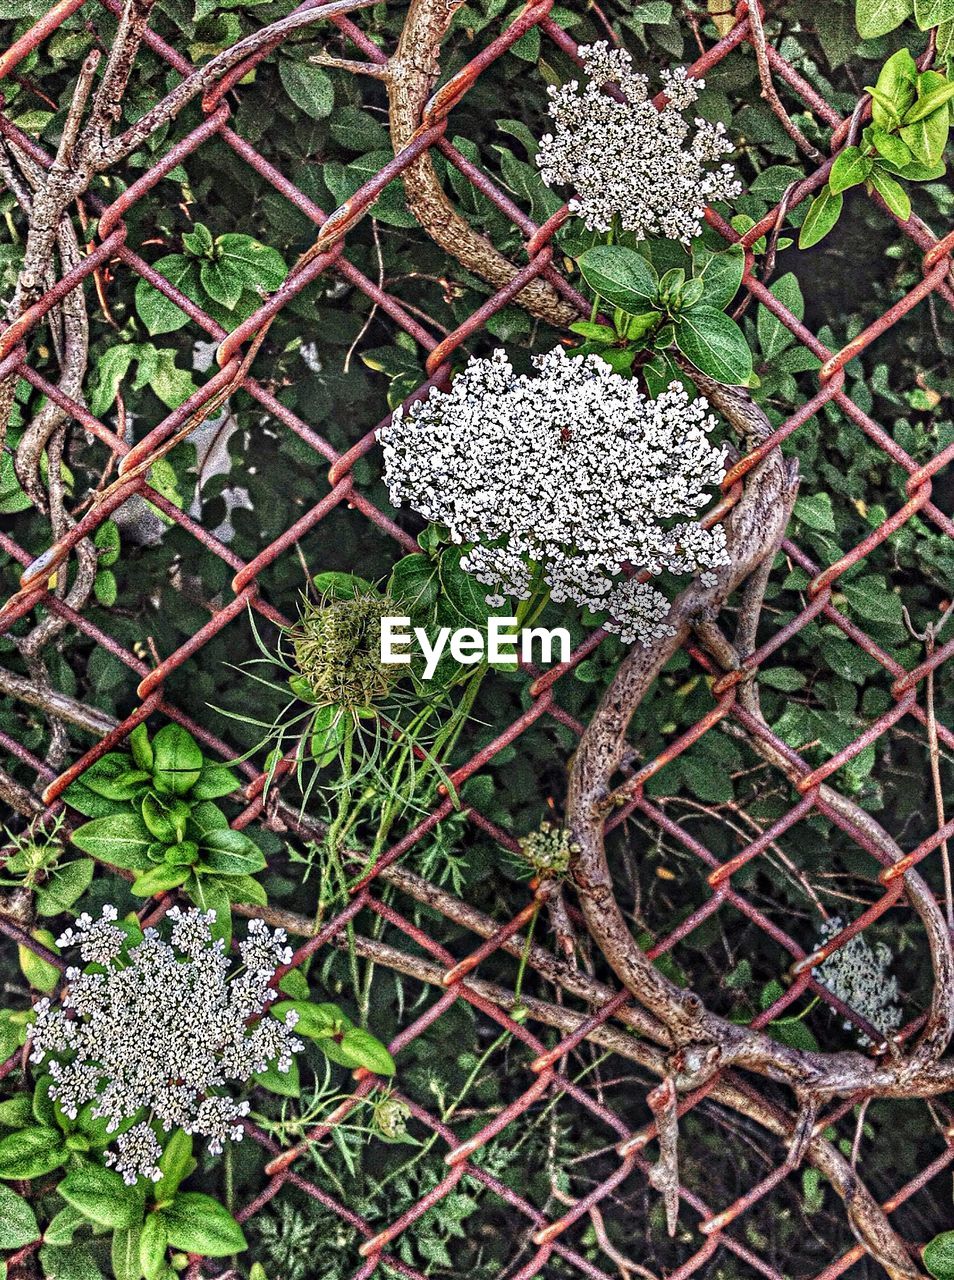 Plants on chain link fence